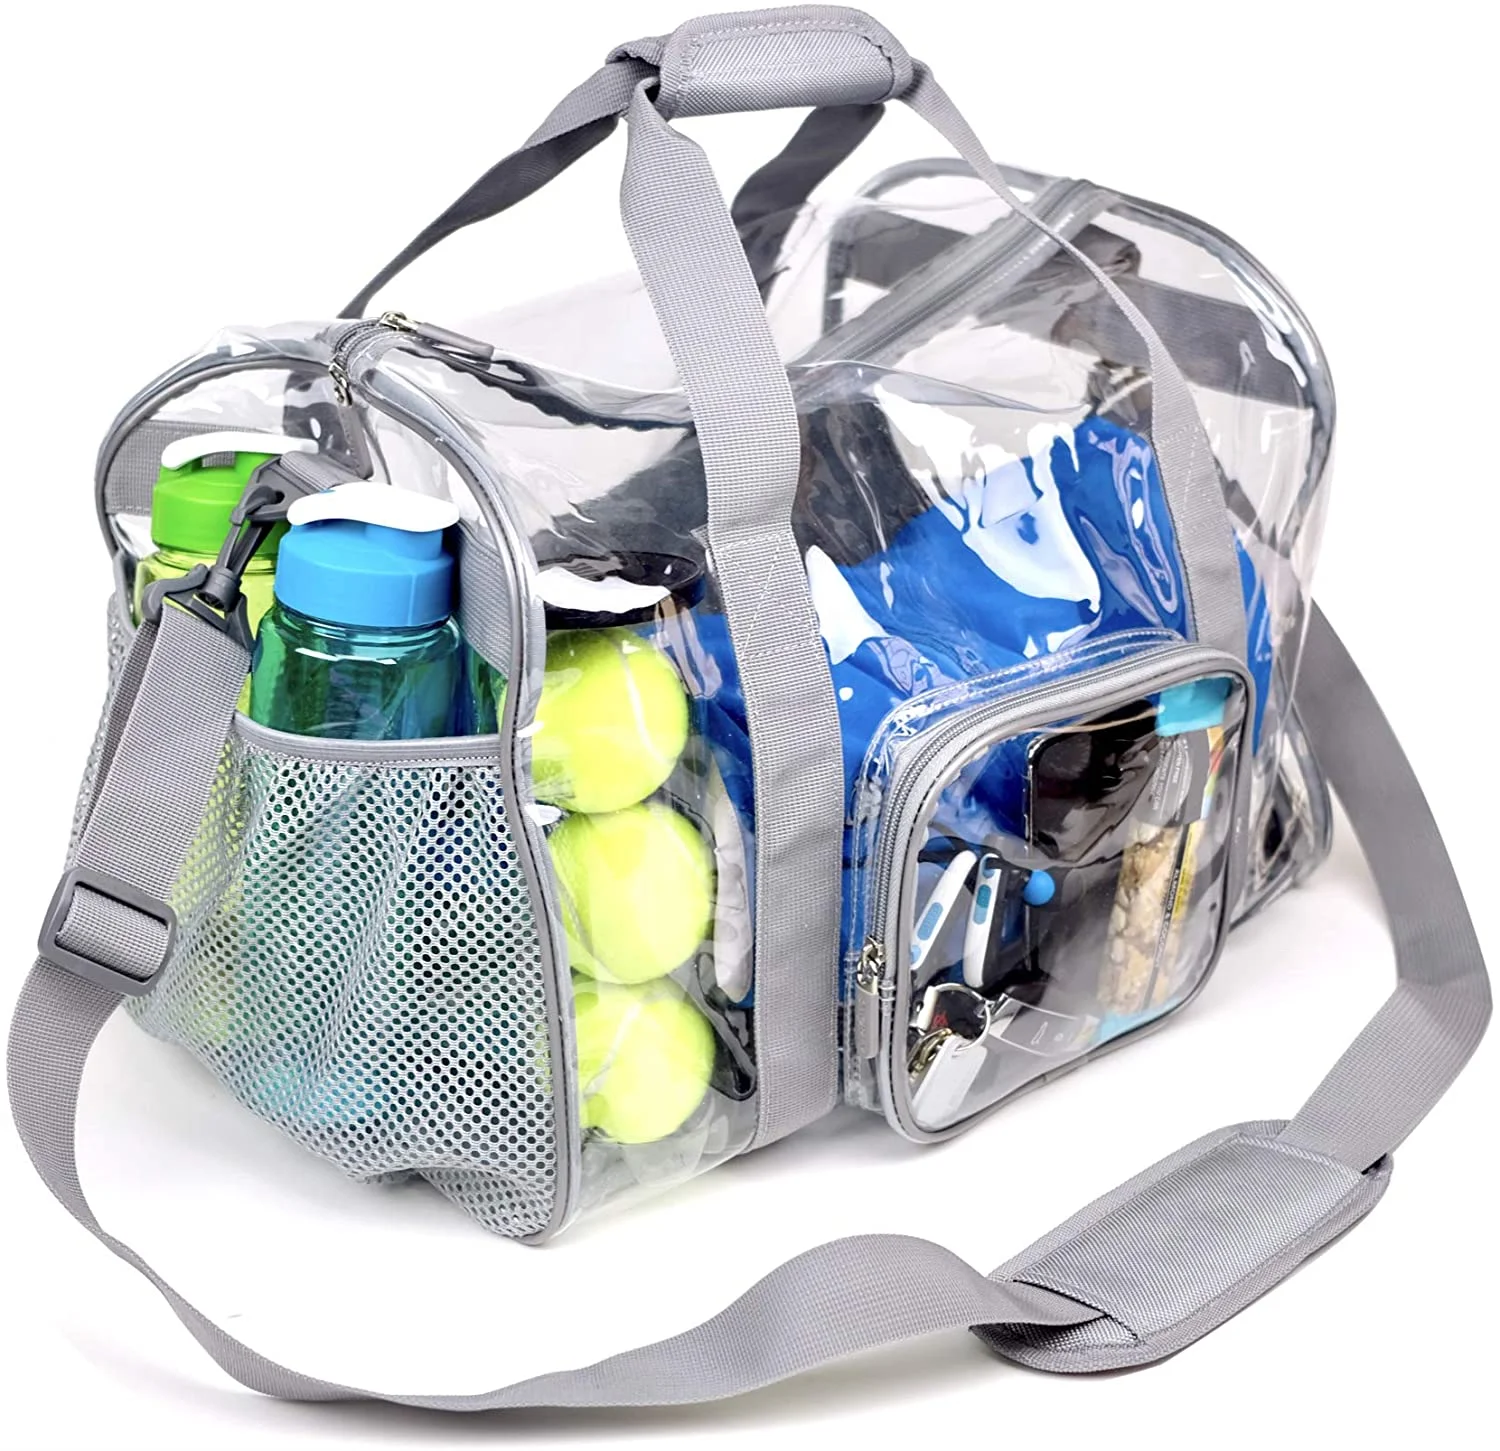 Clear Duffel Bag with Shoes Compartment